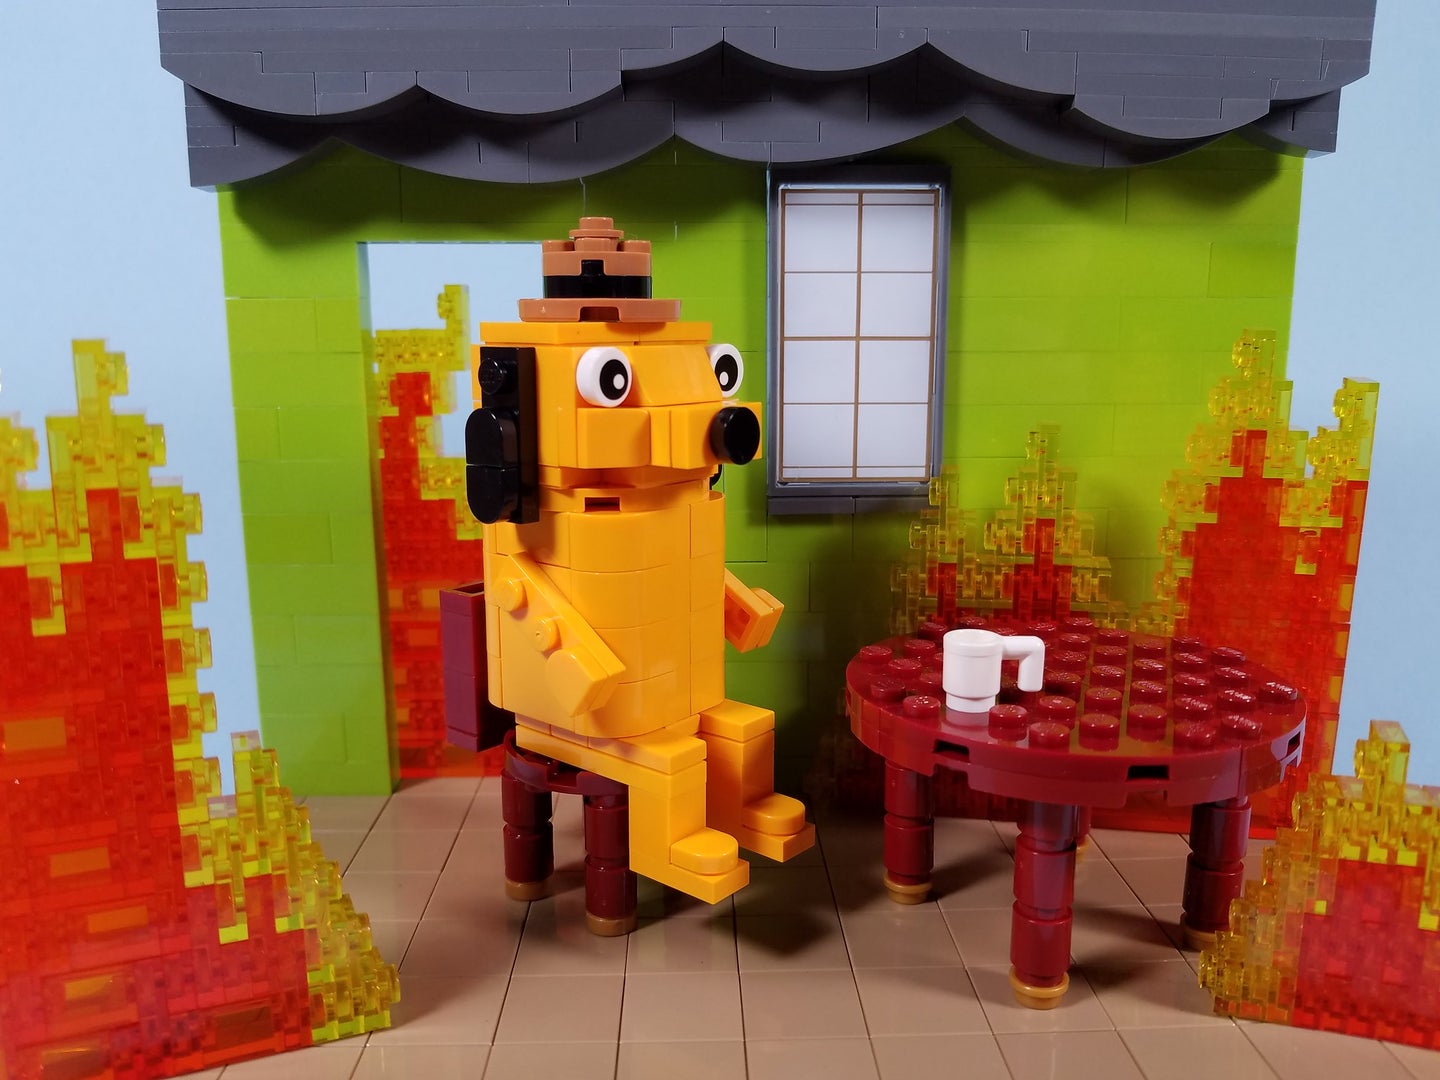 Lego construction of house on fire meme